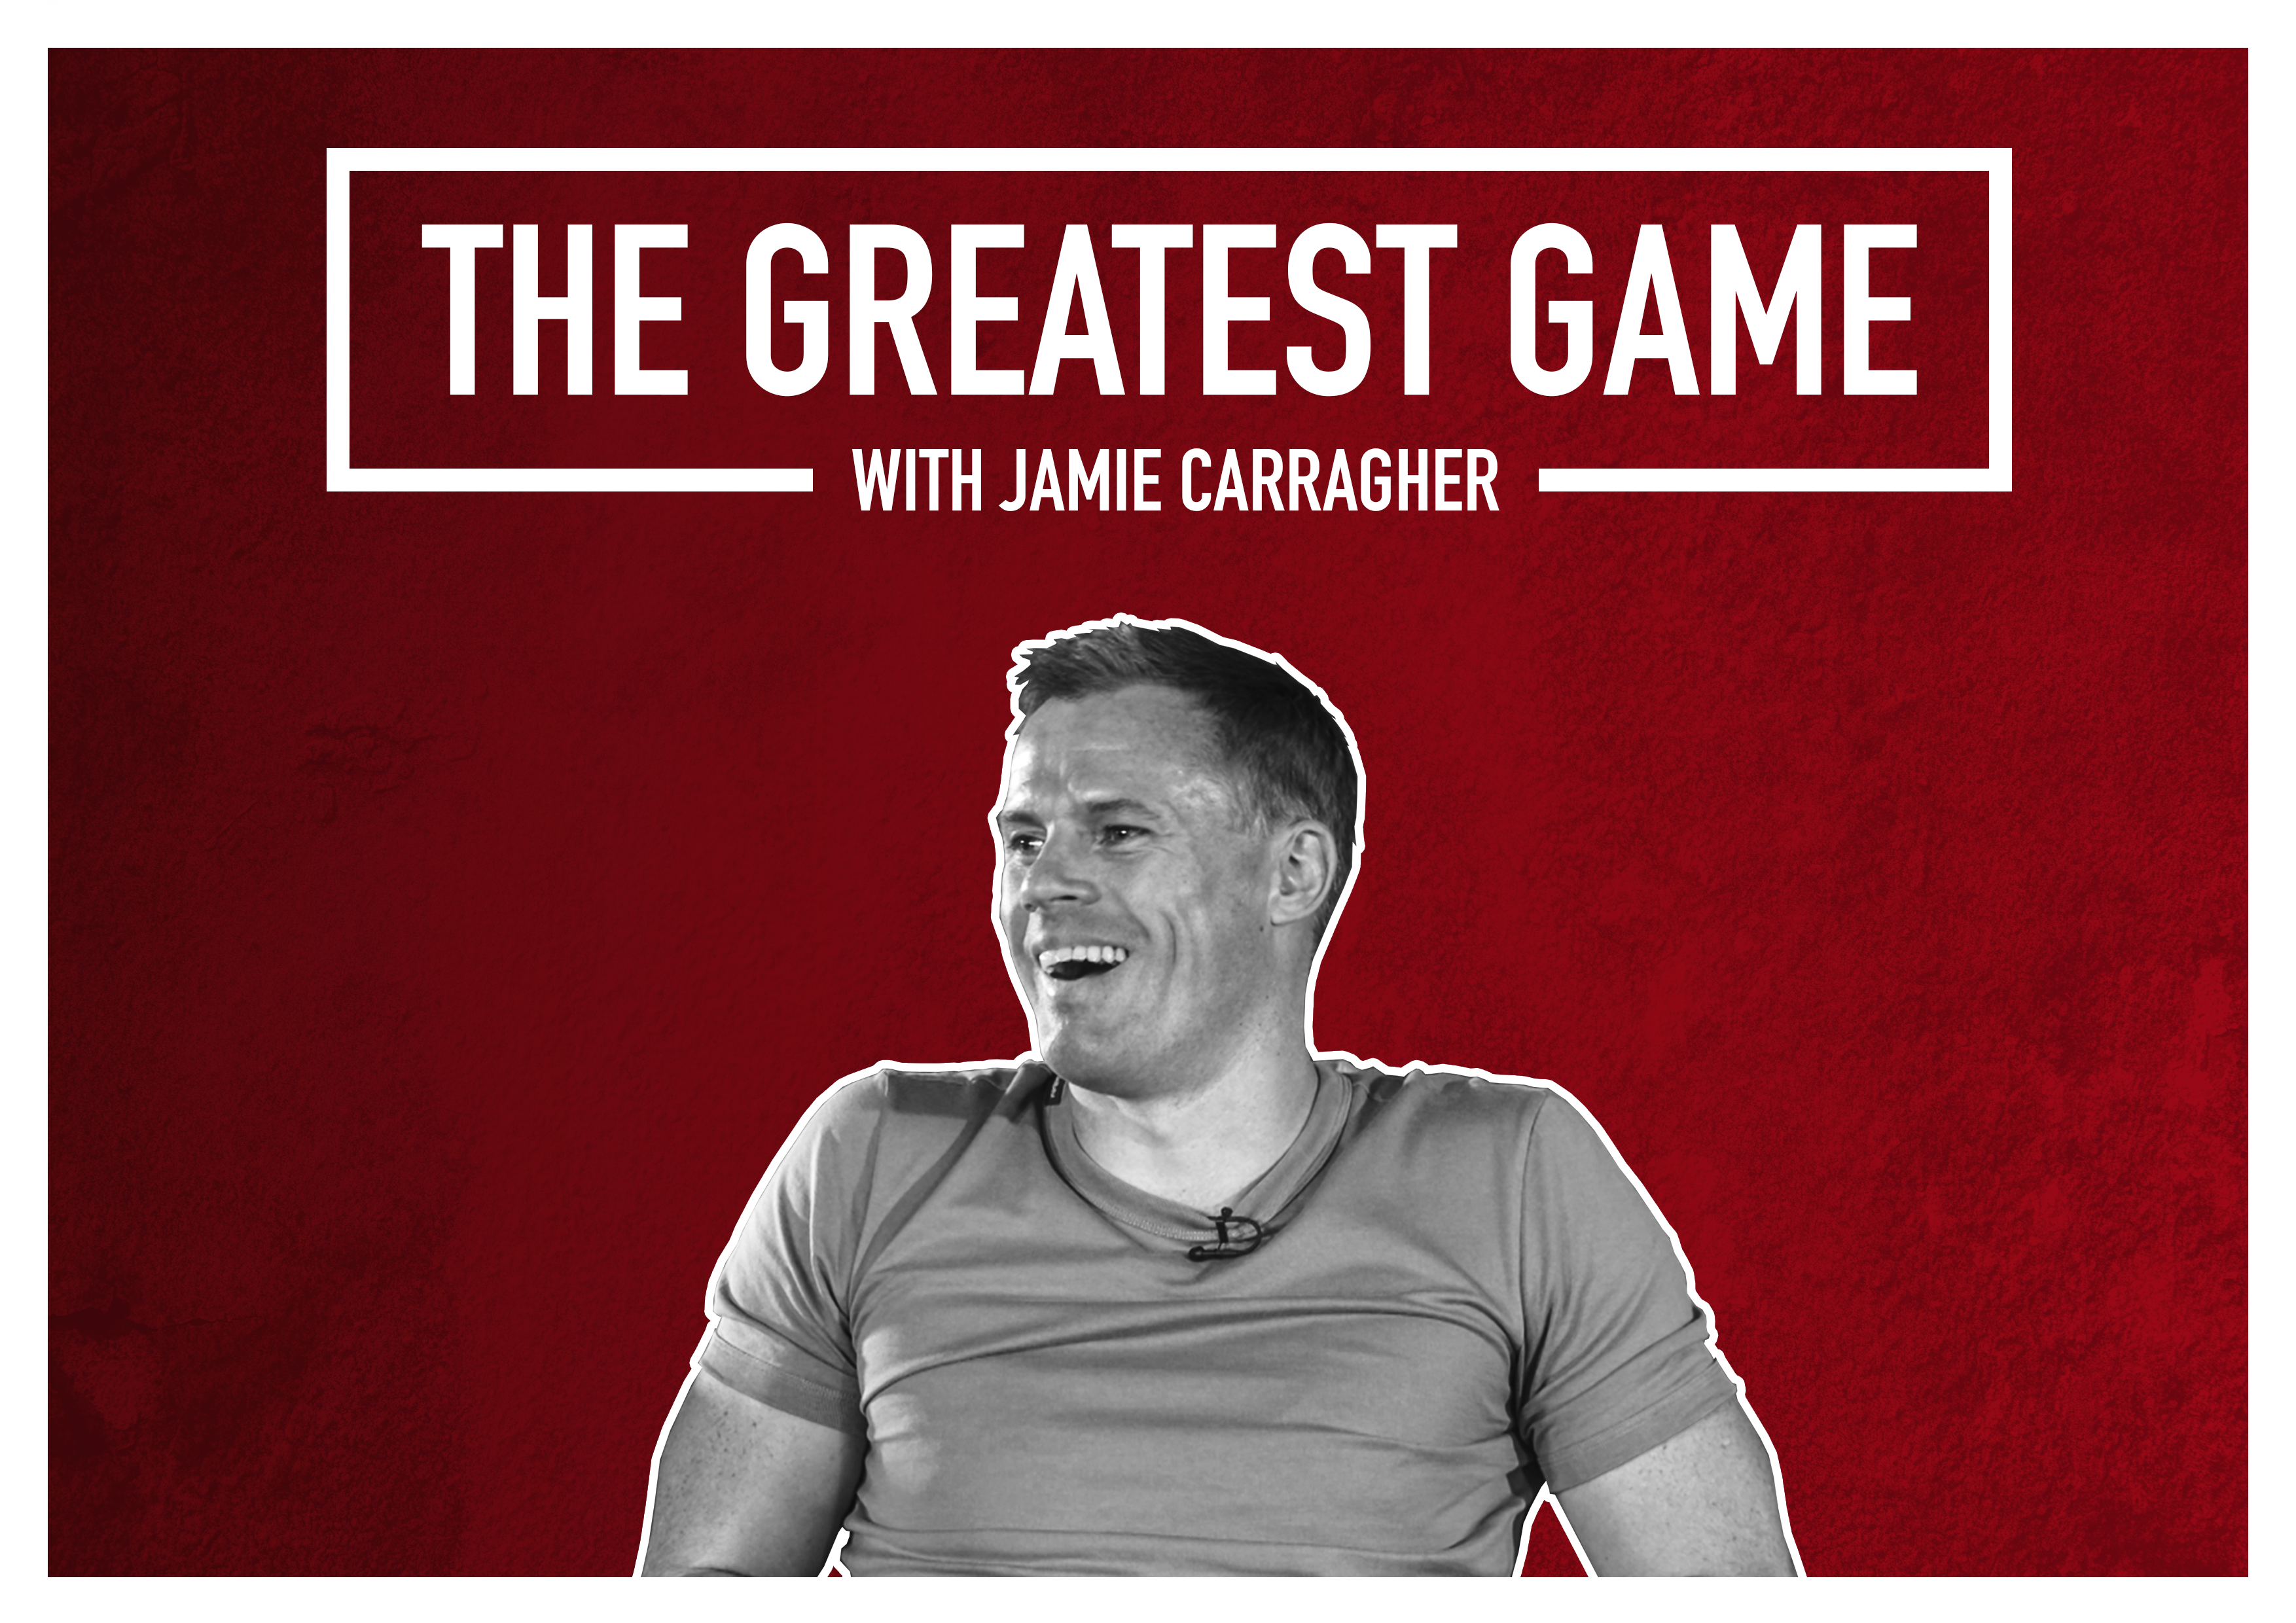 The Greatest Game with Jamie Carragher image